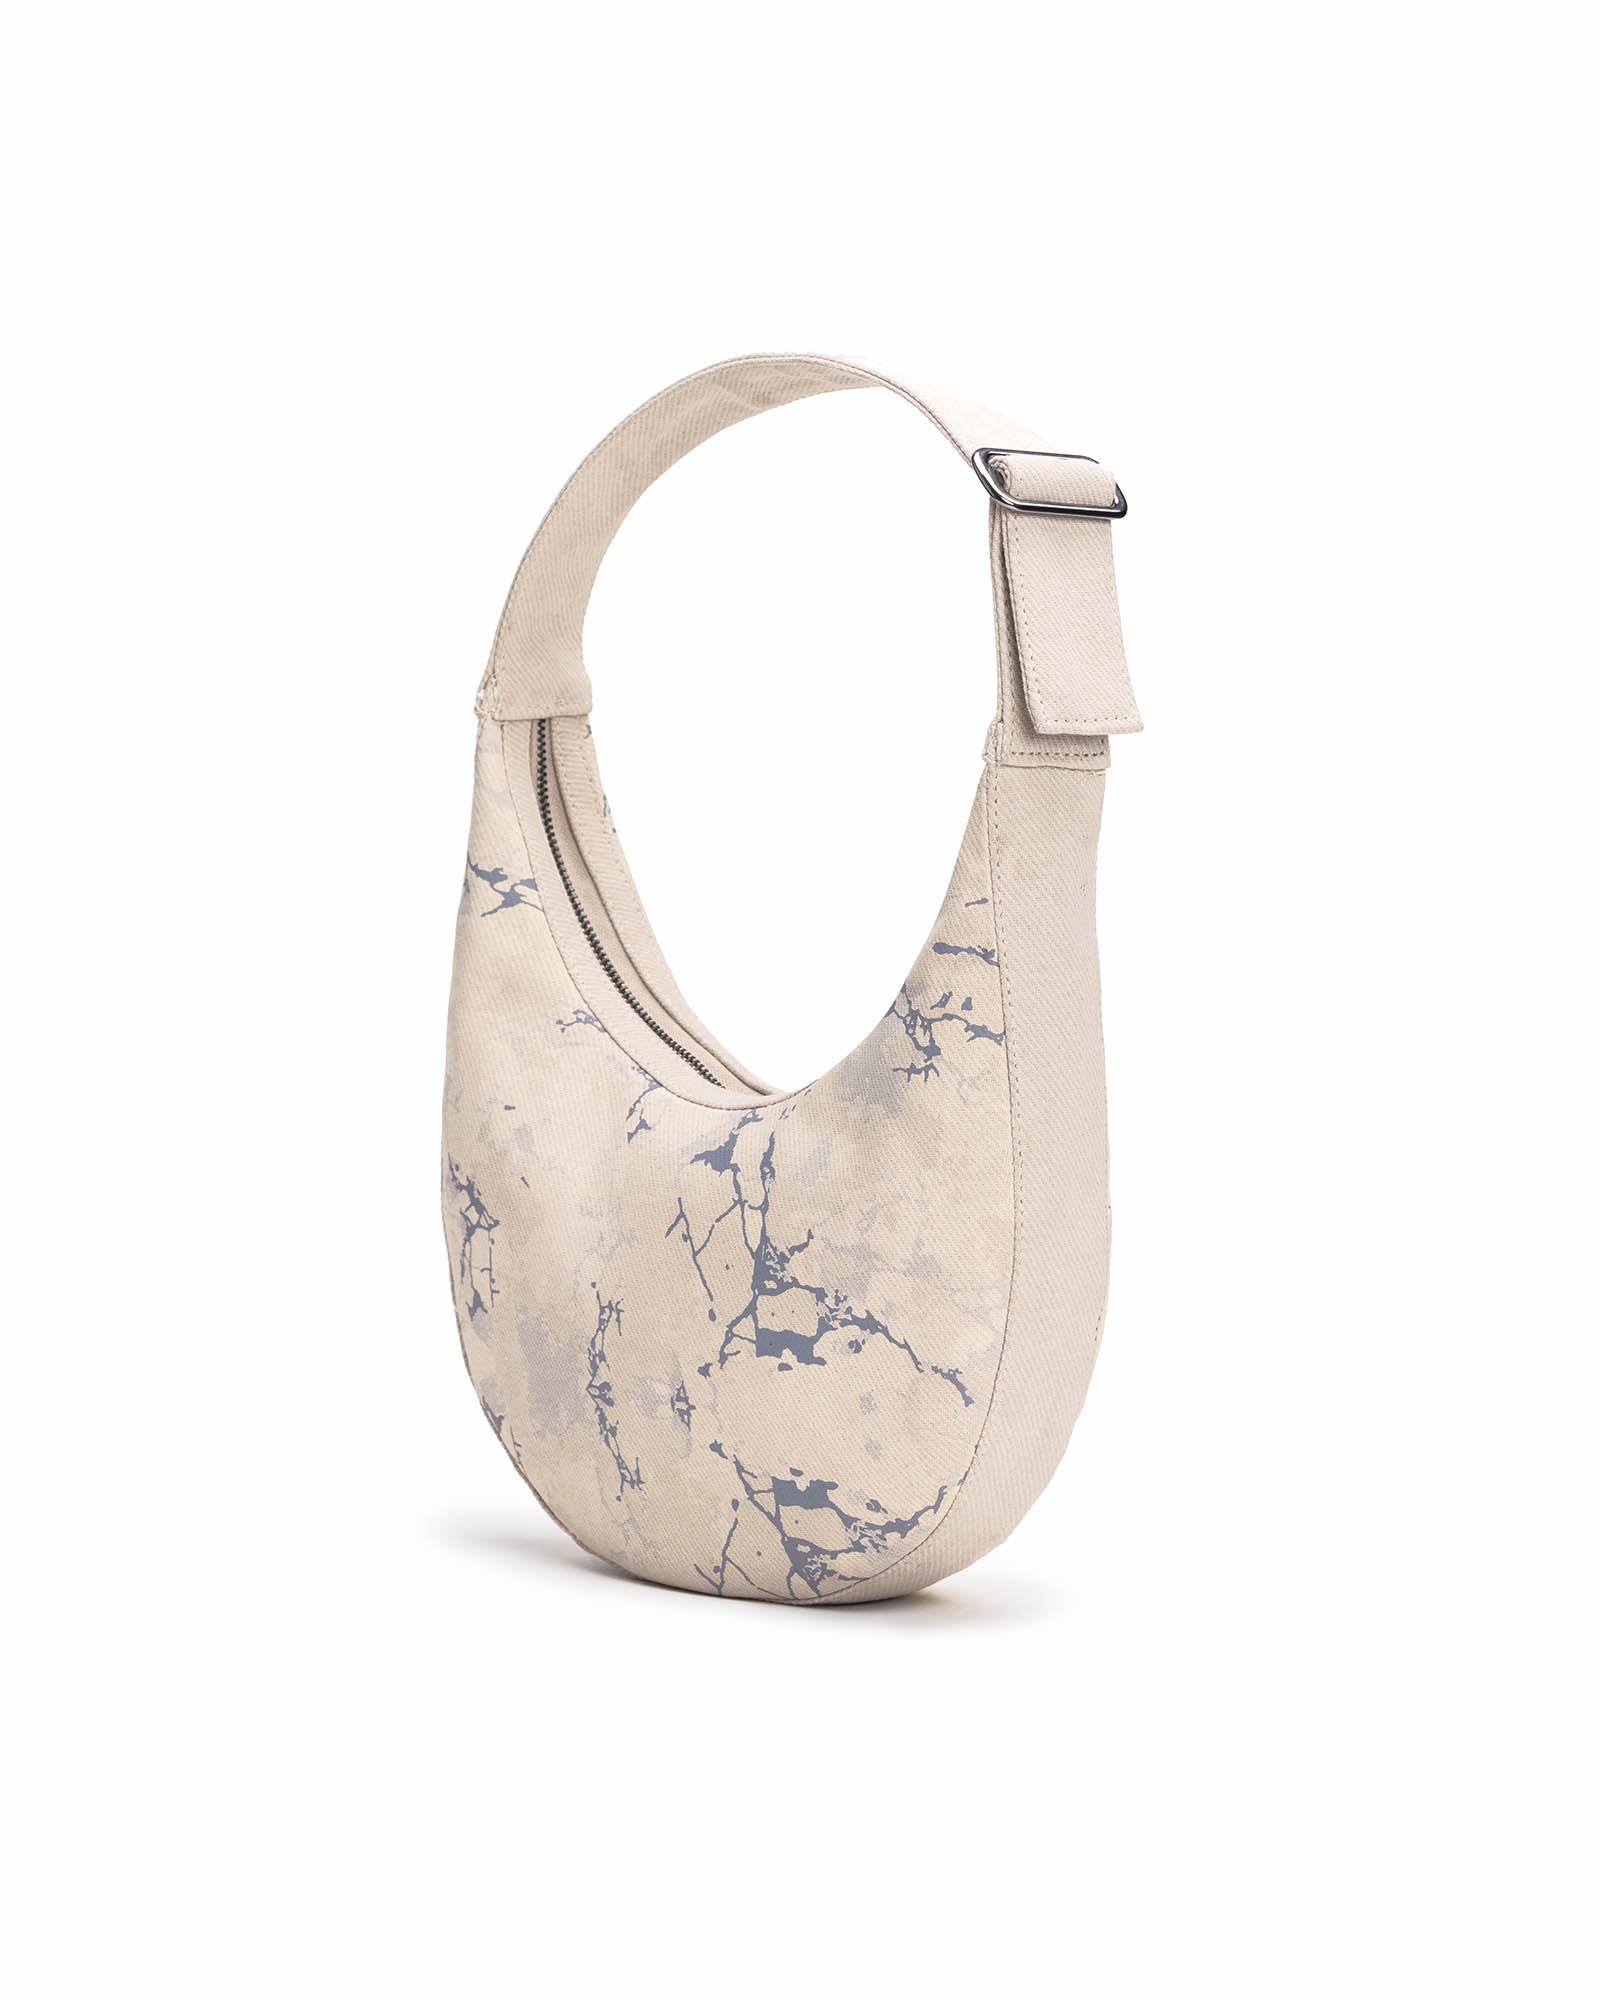 The Moon Bag - Marble Marvel: Eco-Friendly and Sustainable The Moon Bag by ecoright